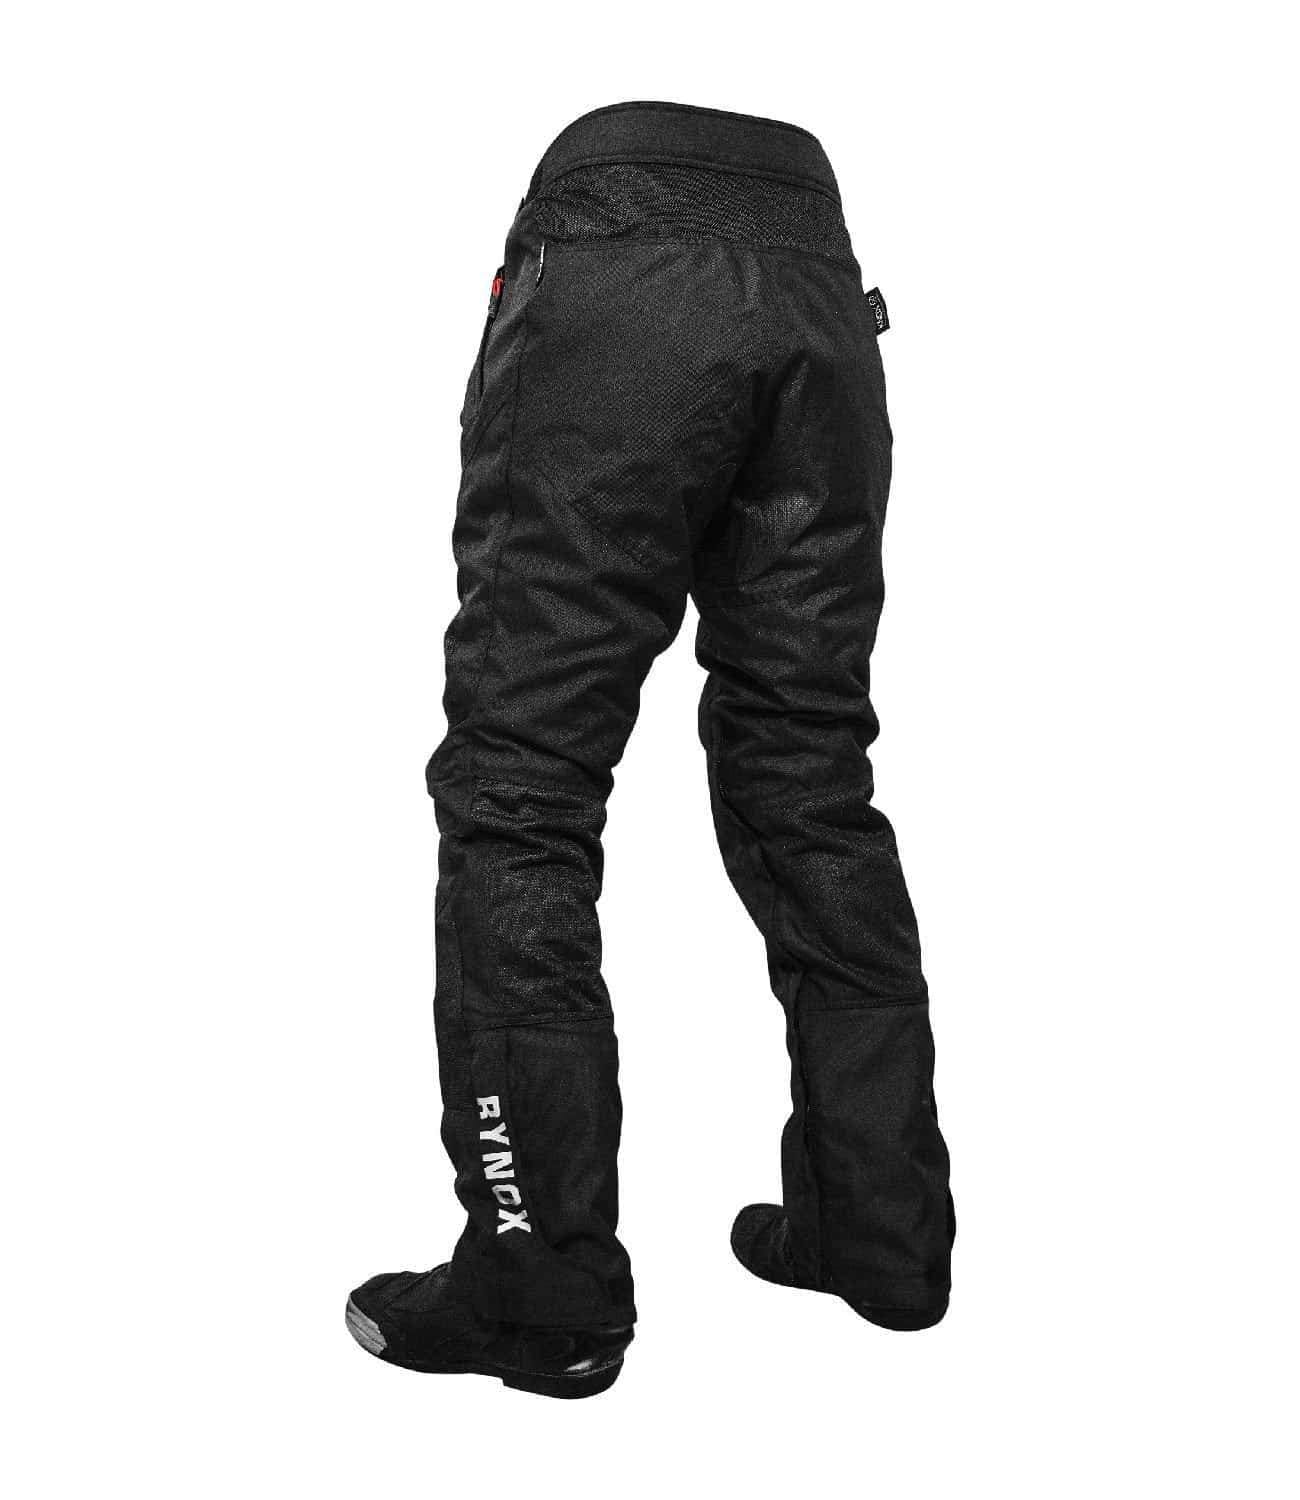 SCALA STREET RIDING PANT – Open Road Pune | Riding Gear